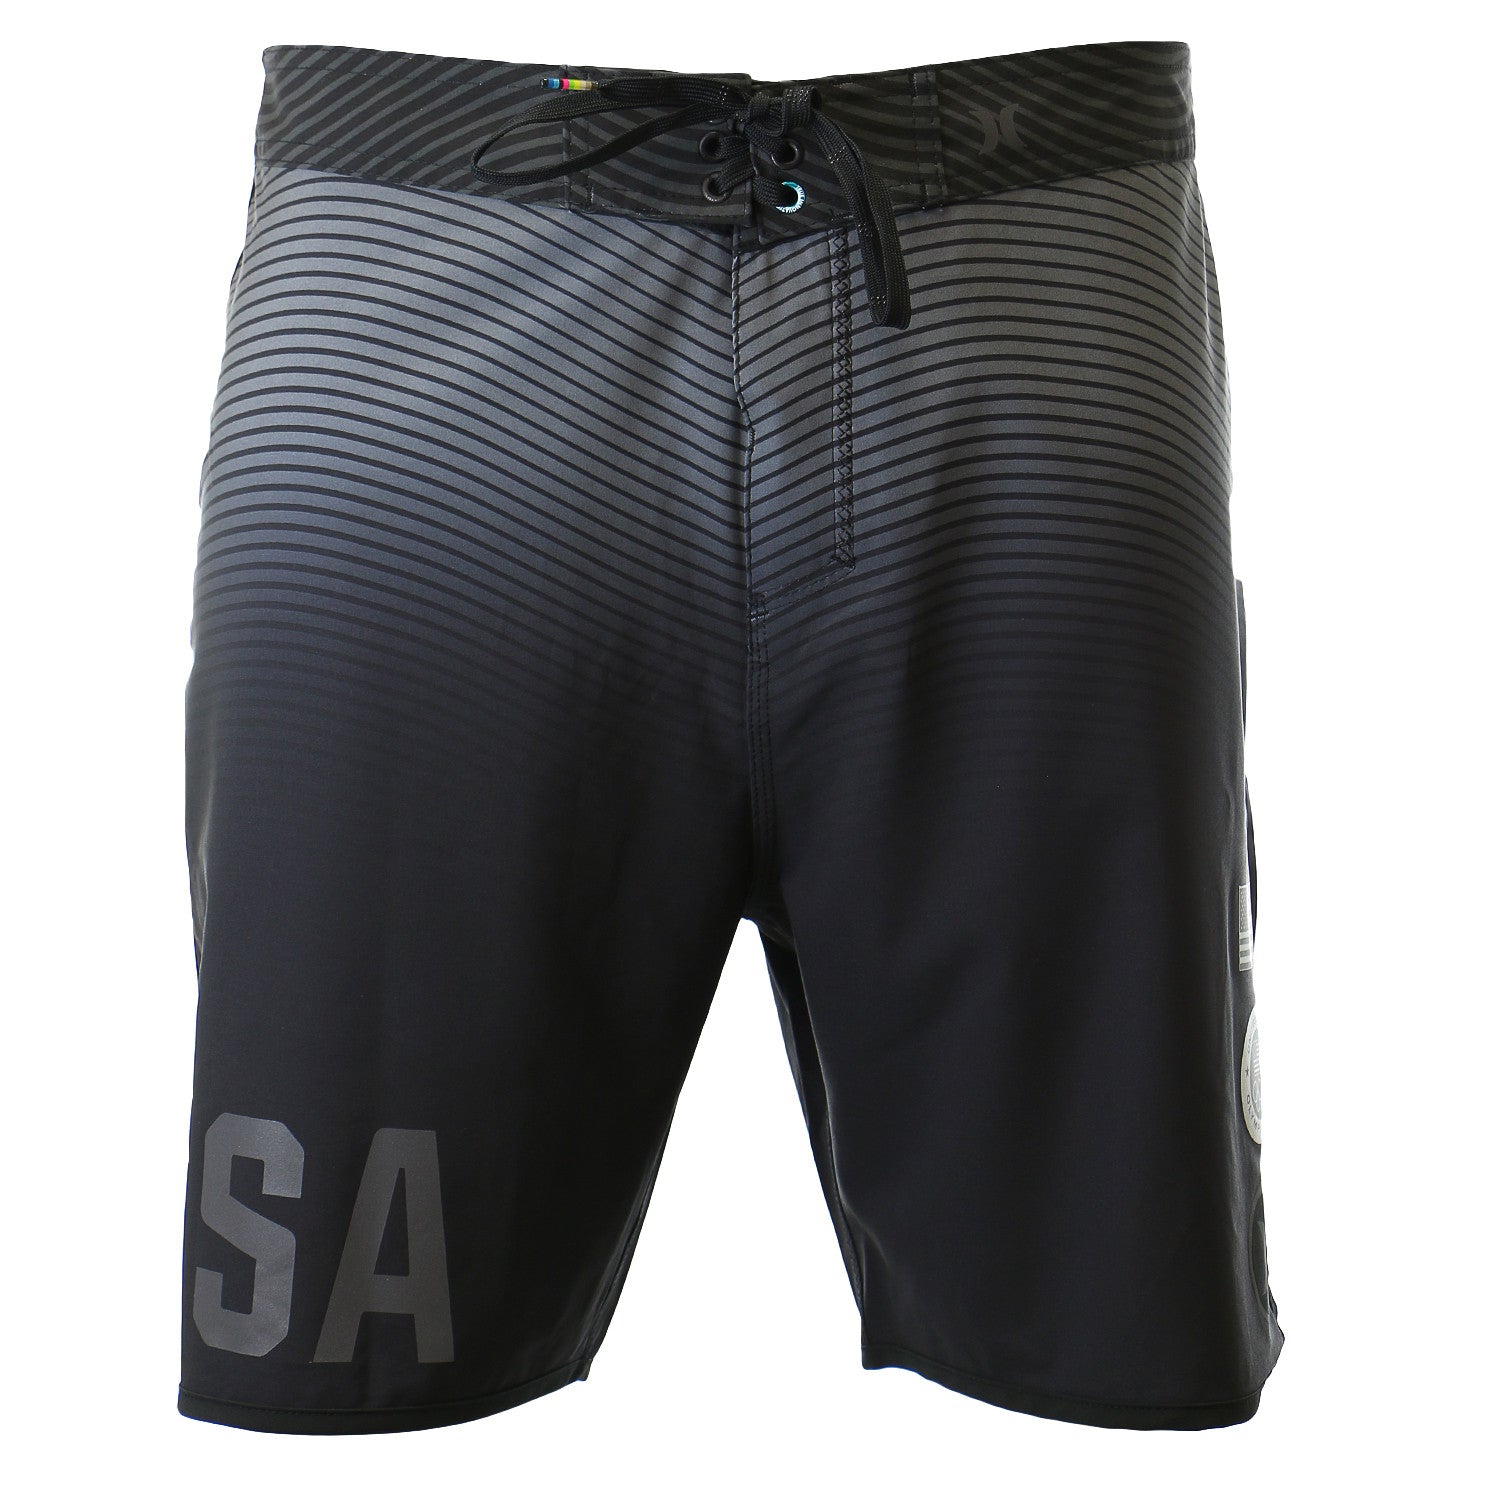 Huk H2000040-001-S Nxtlvl 7 Short, Color, Size, Black, Small